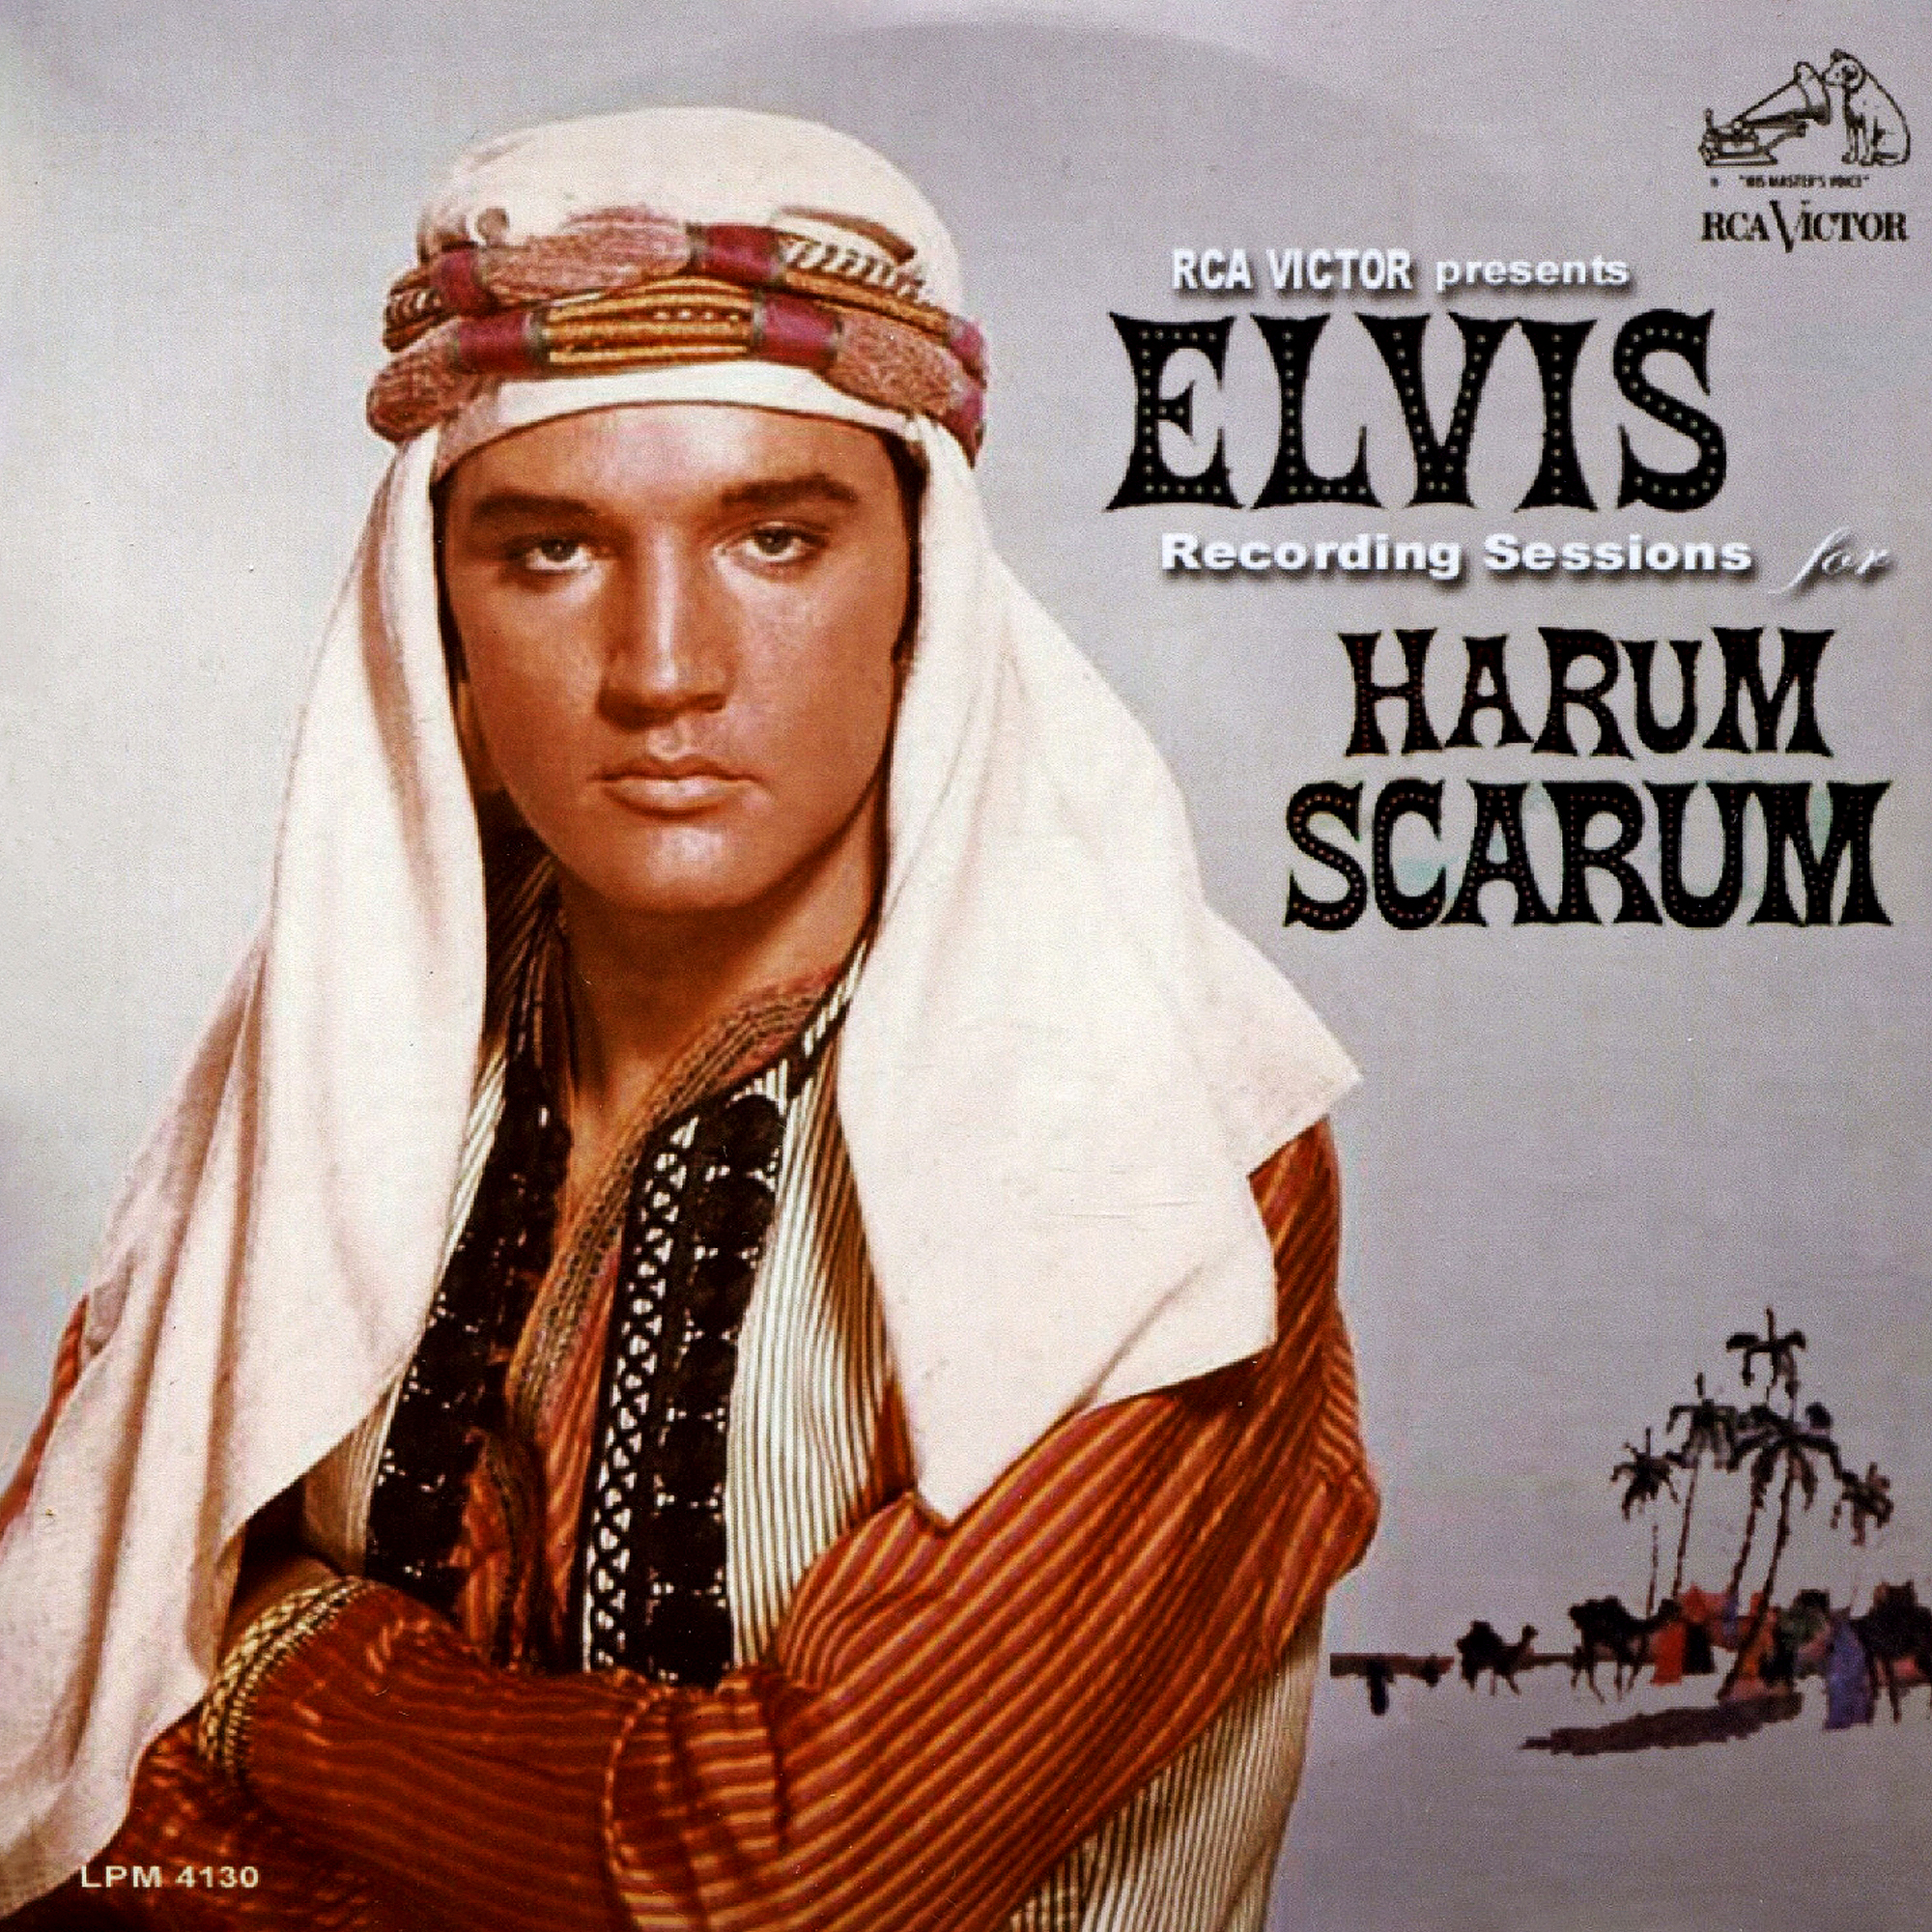 Elvis Presley - Recording Sessions For Harum Scarum [CMT Star LPM4130]